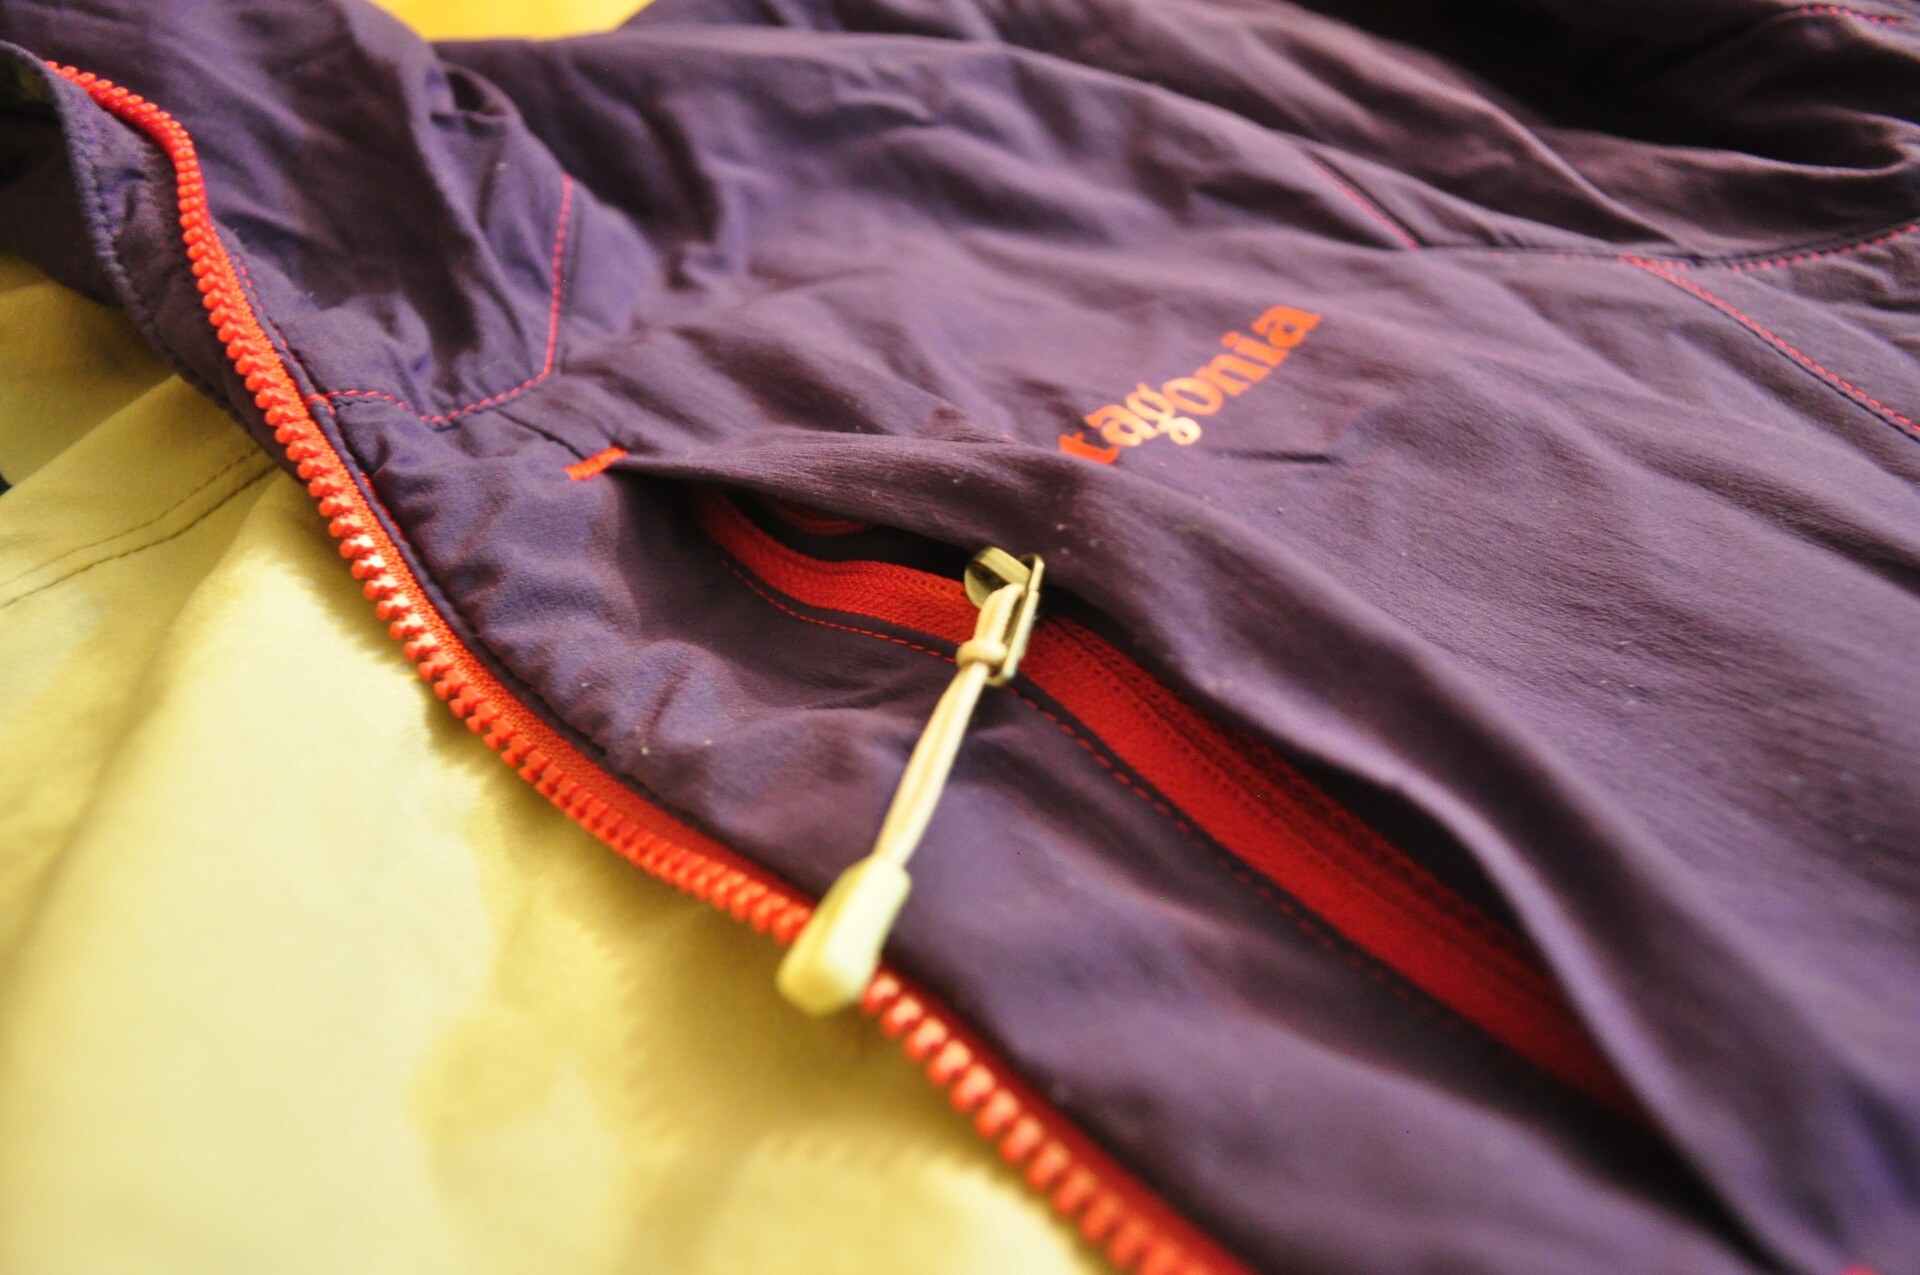 A chest zipper caught on the jacket's thin material